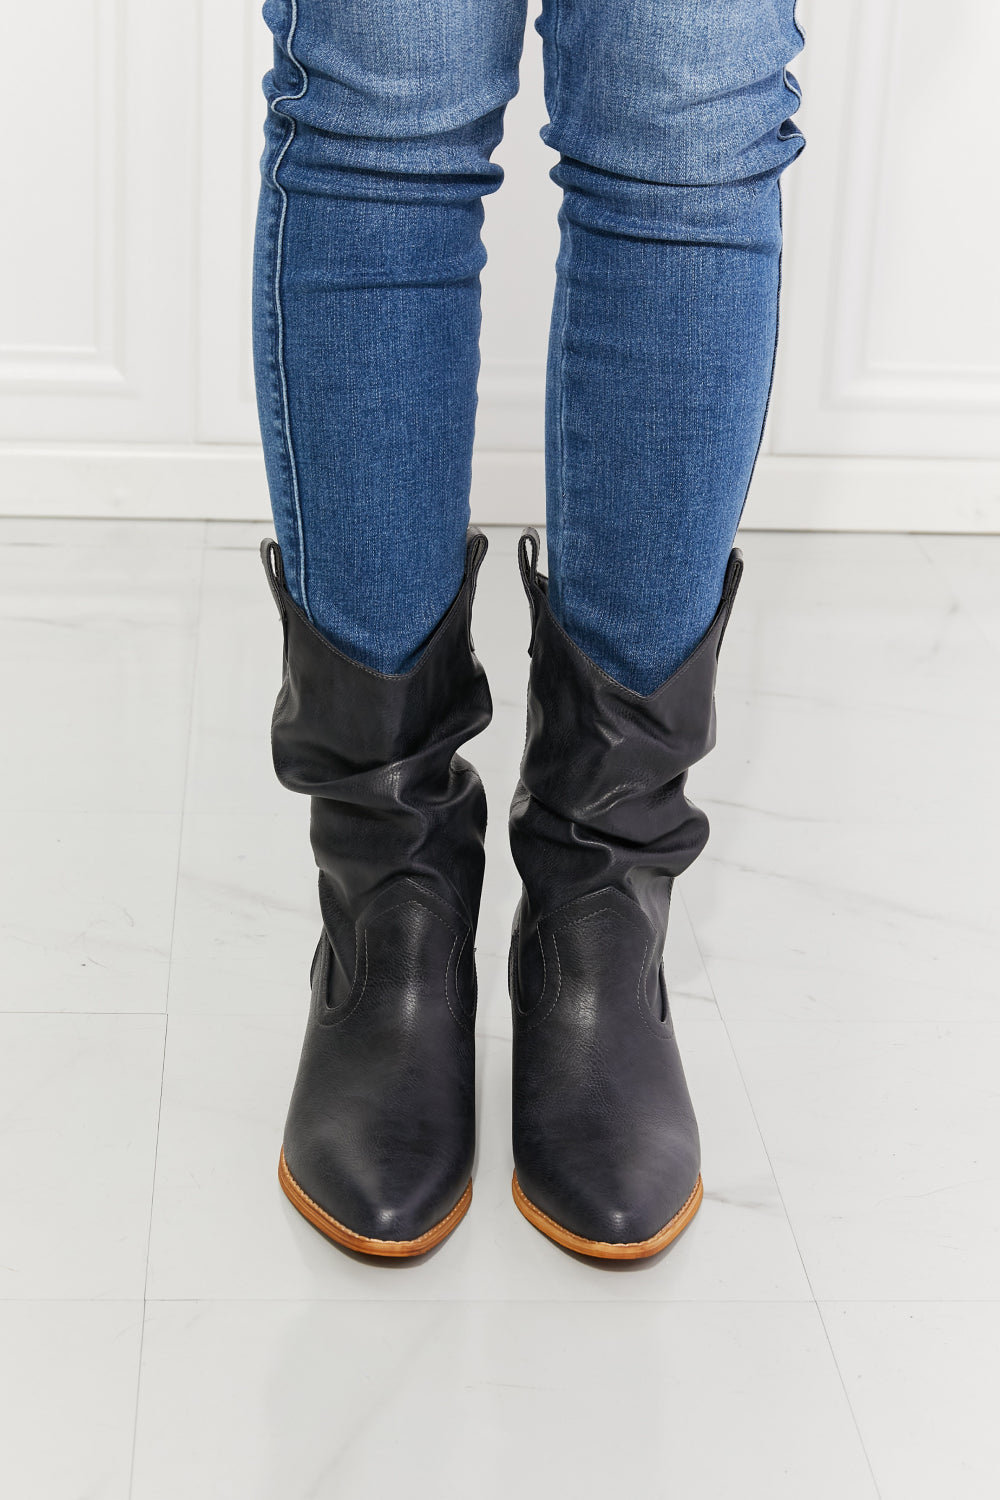 The Navy Scrunchie Boot